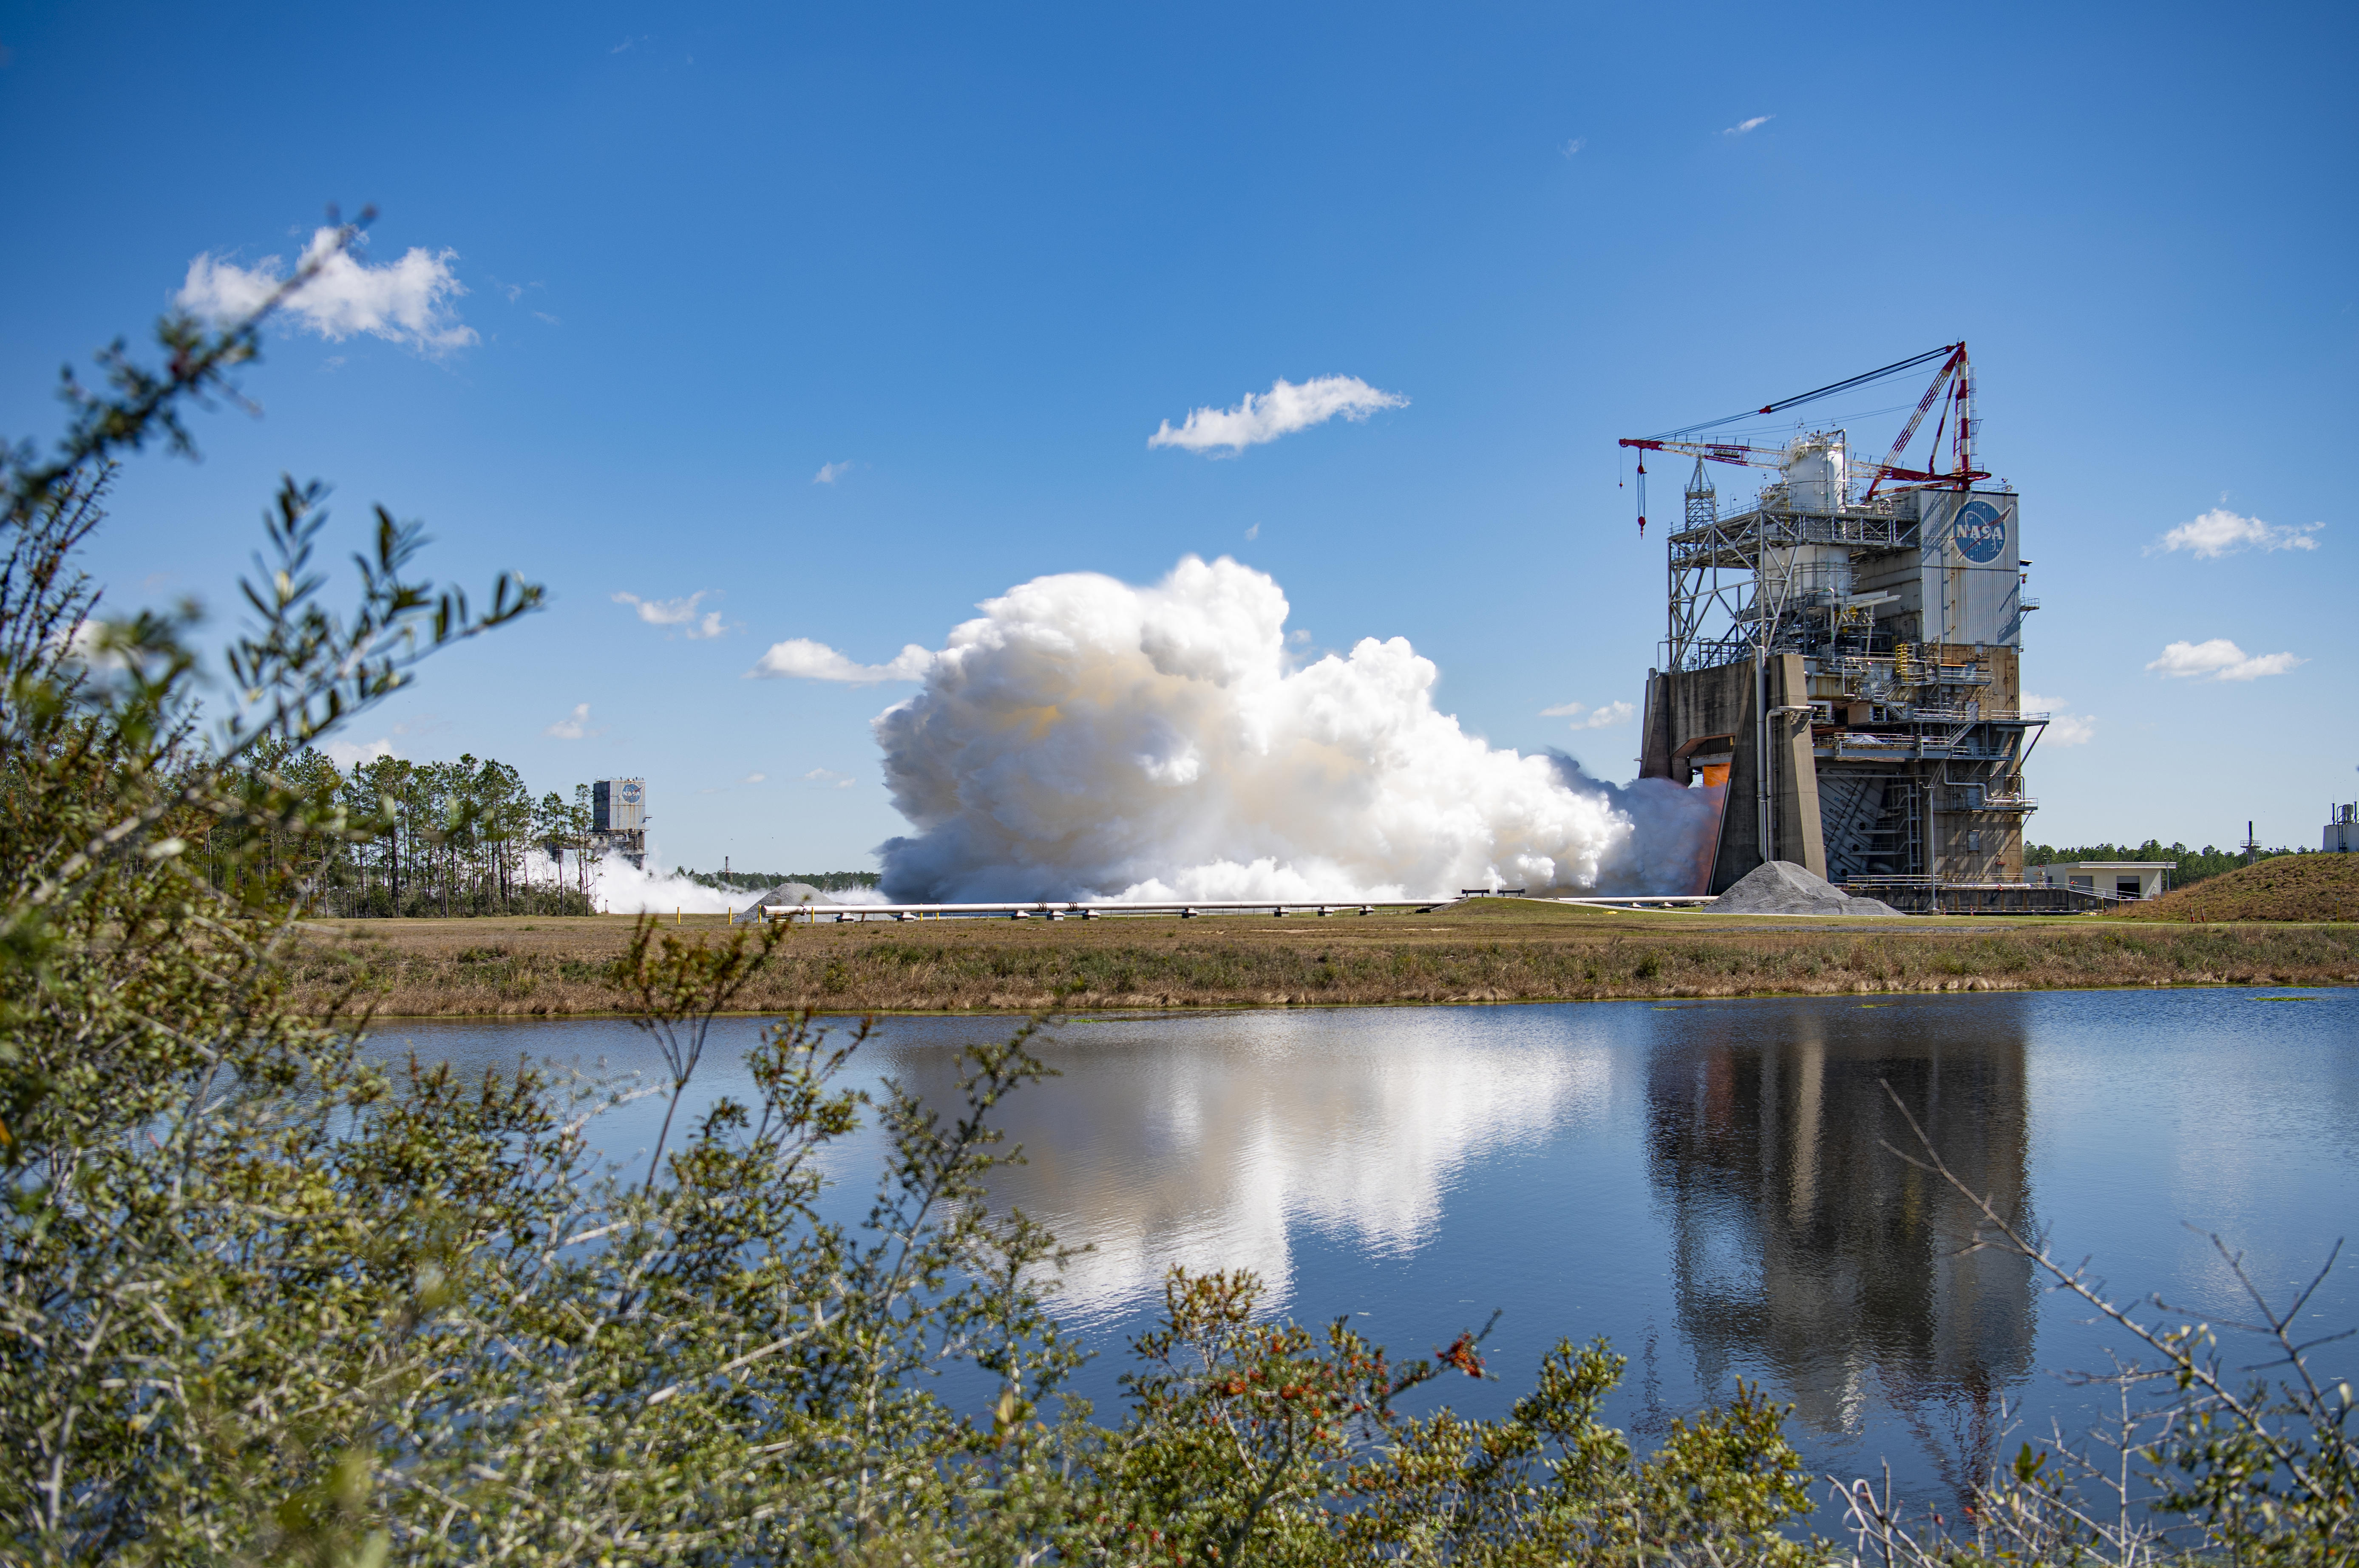 full-duration RS-25 engine hot fire is visible in the background of the image